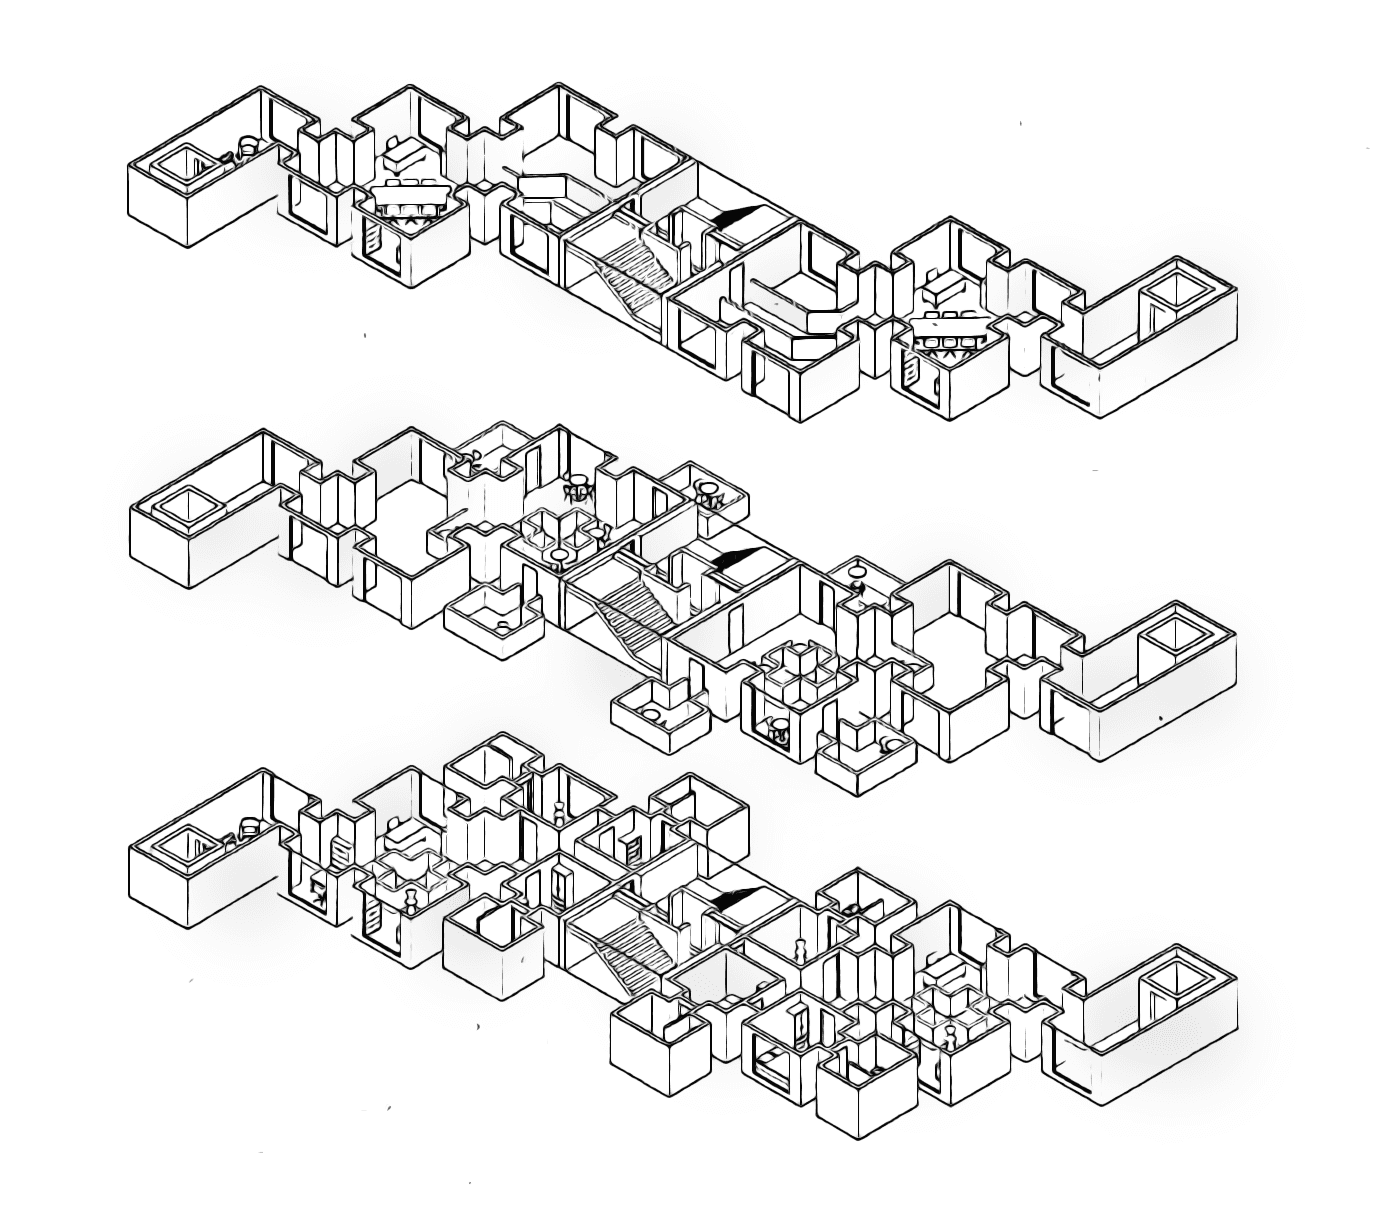 Orthographic southwest isometric view showing the internal relationship of the building through an exploded plane of each floor. This project was for the use of cohab-living and office work-space.